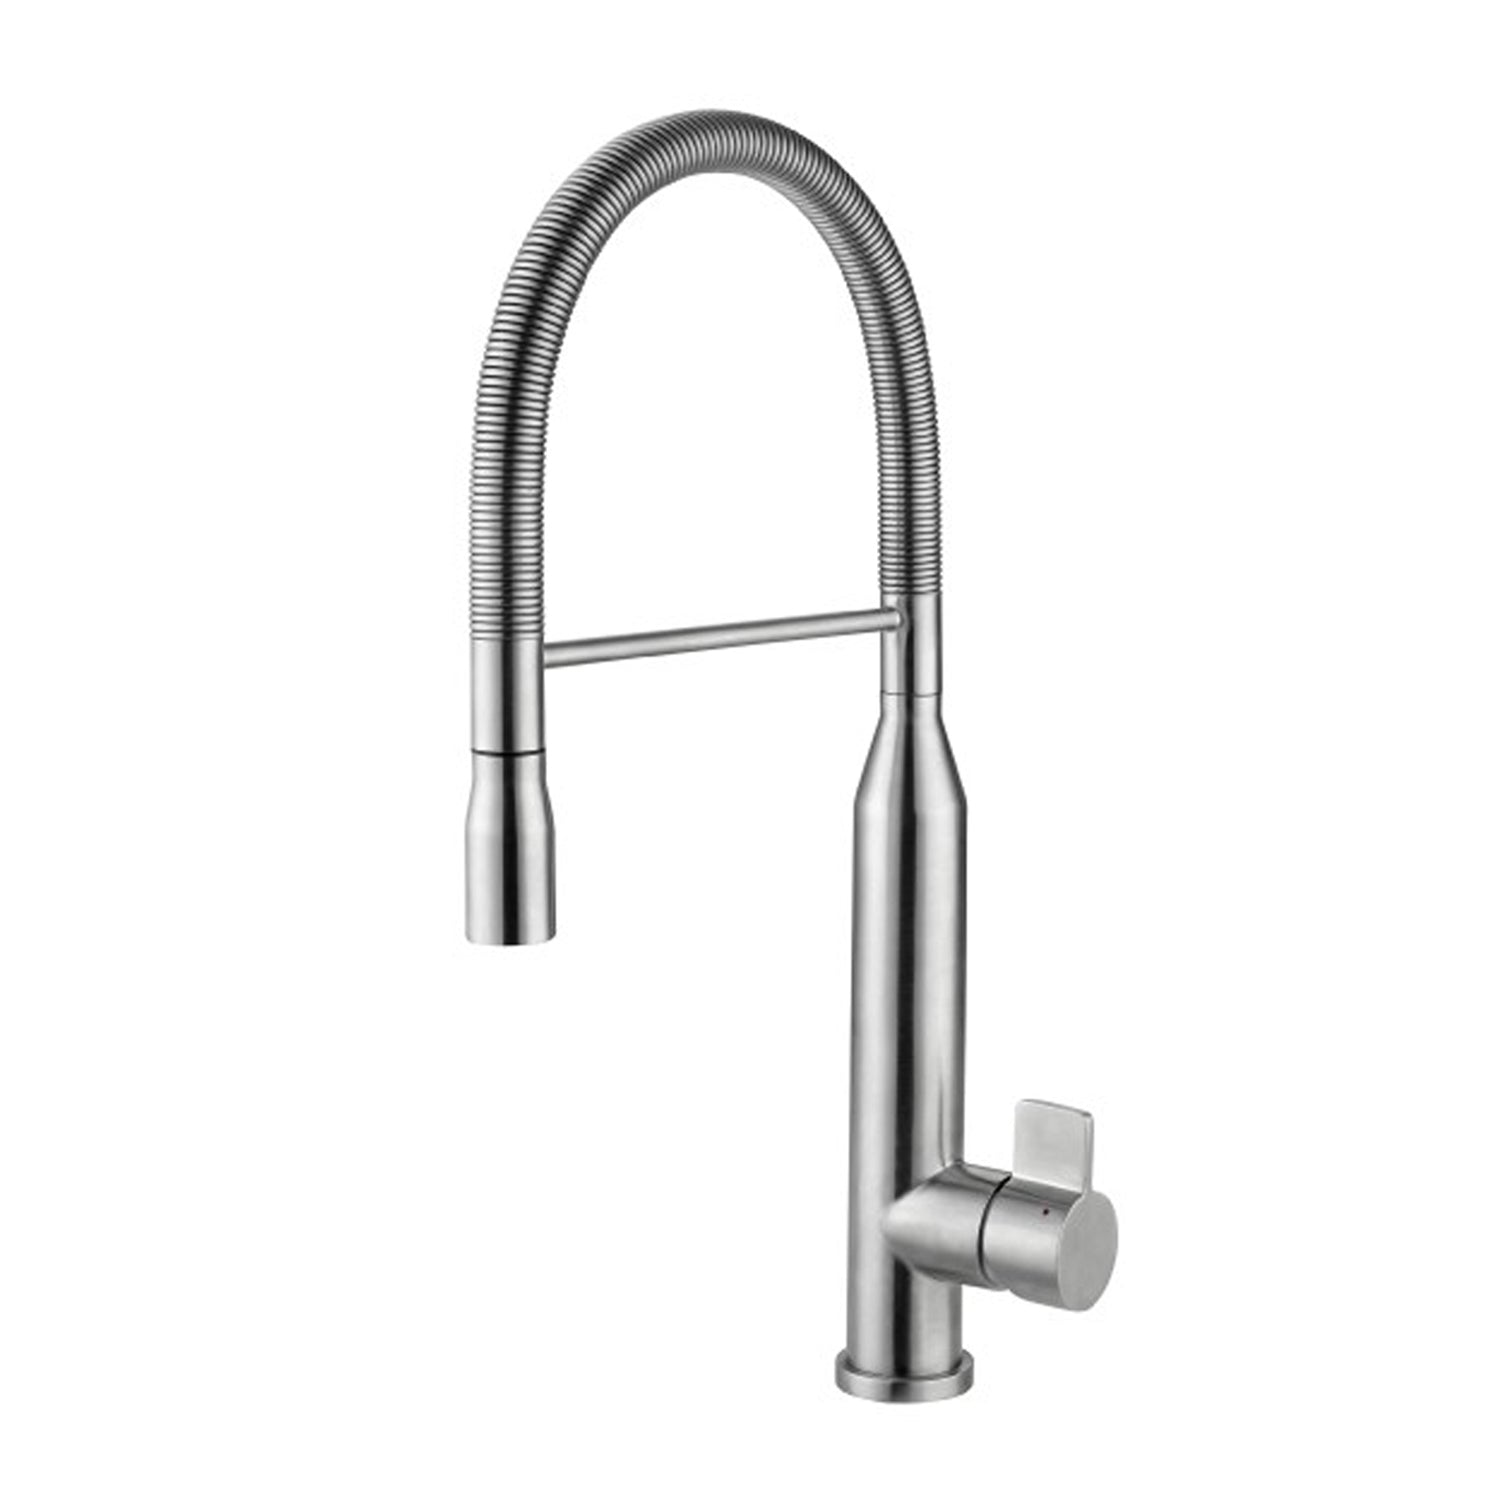 DAX Single Handle Pull Down Kitchen Faucet, Stainless Steel Shower Head and Body, Brushed Finish, Size 9-1/16 x 19-5/16 Inches (DAX-S1095A)